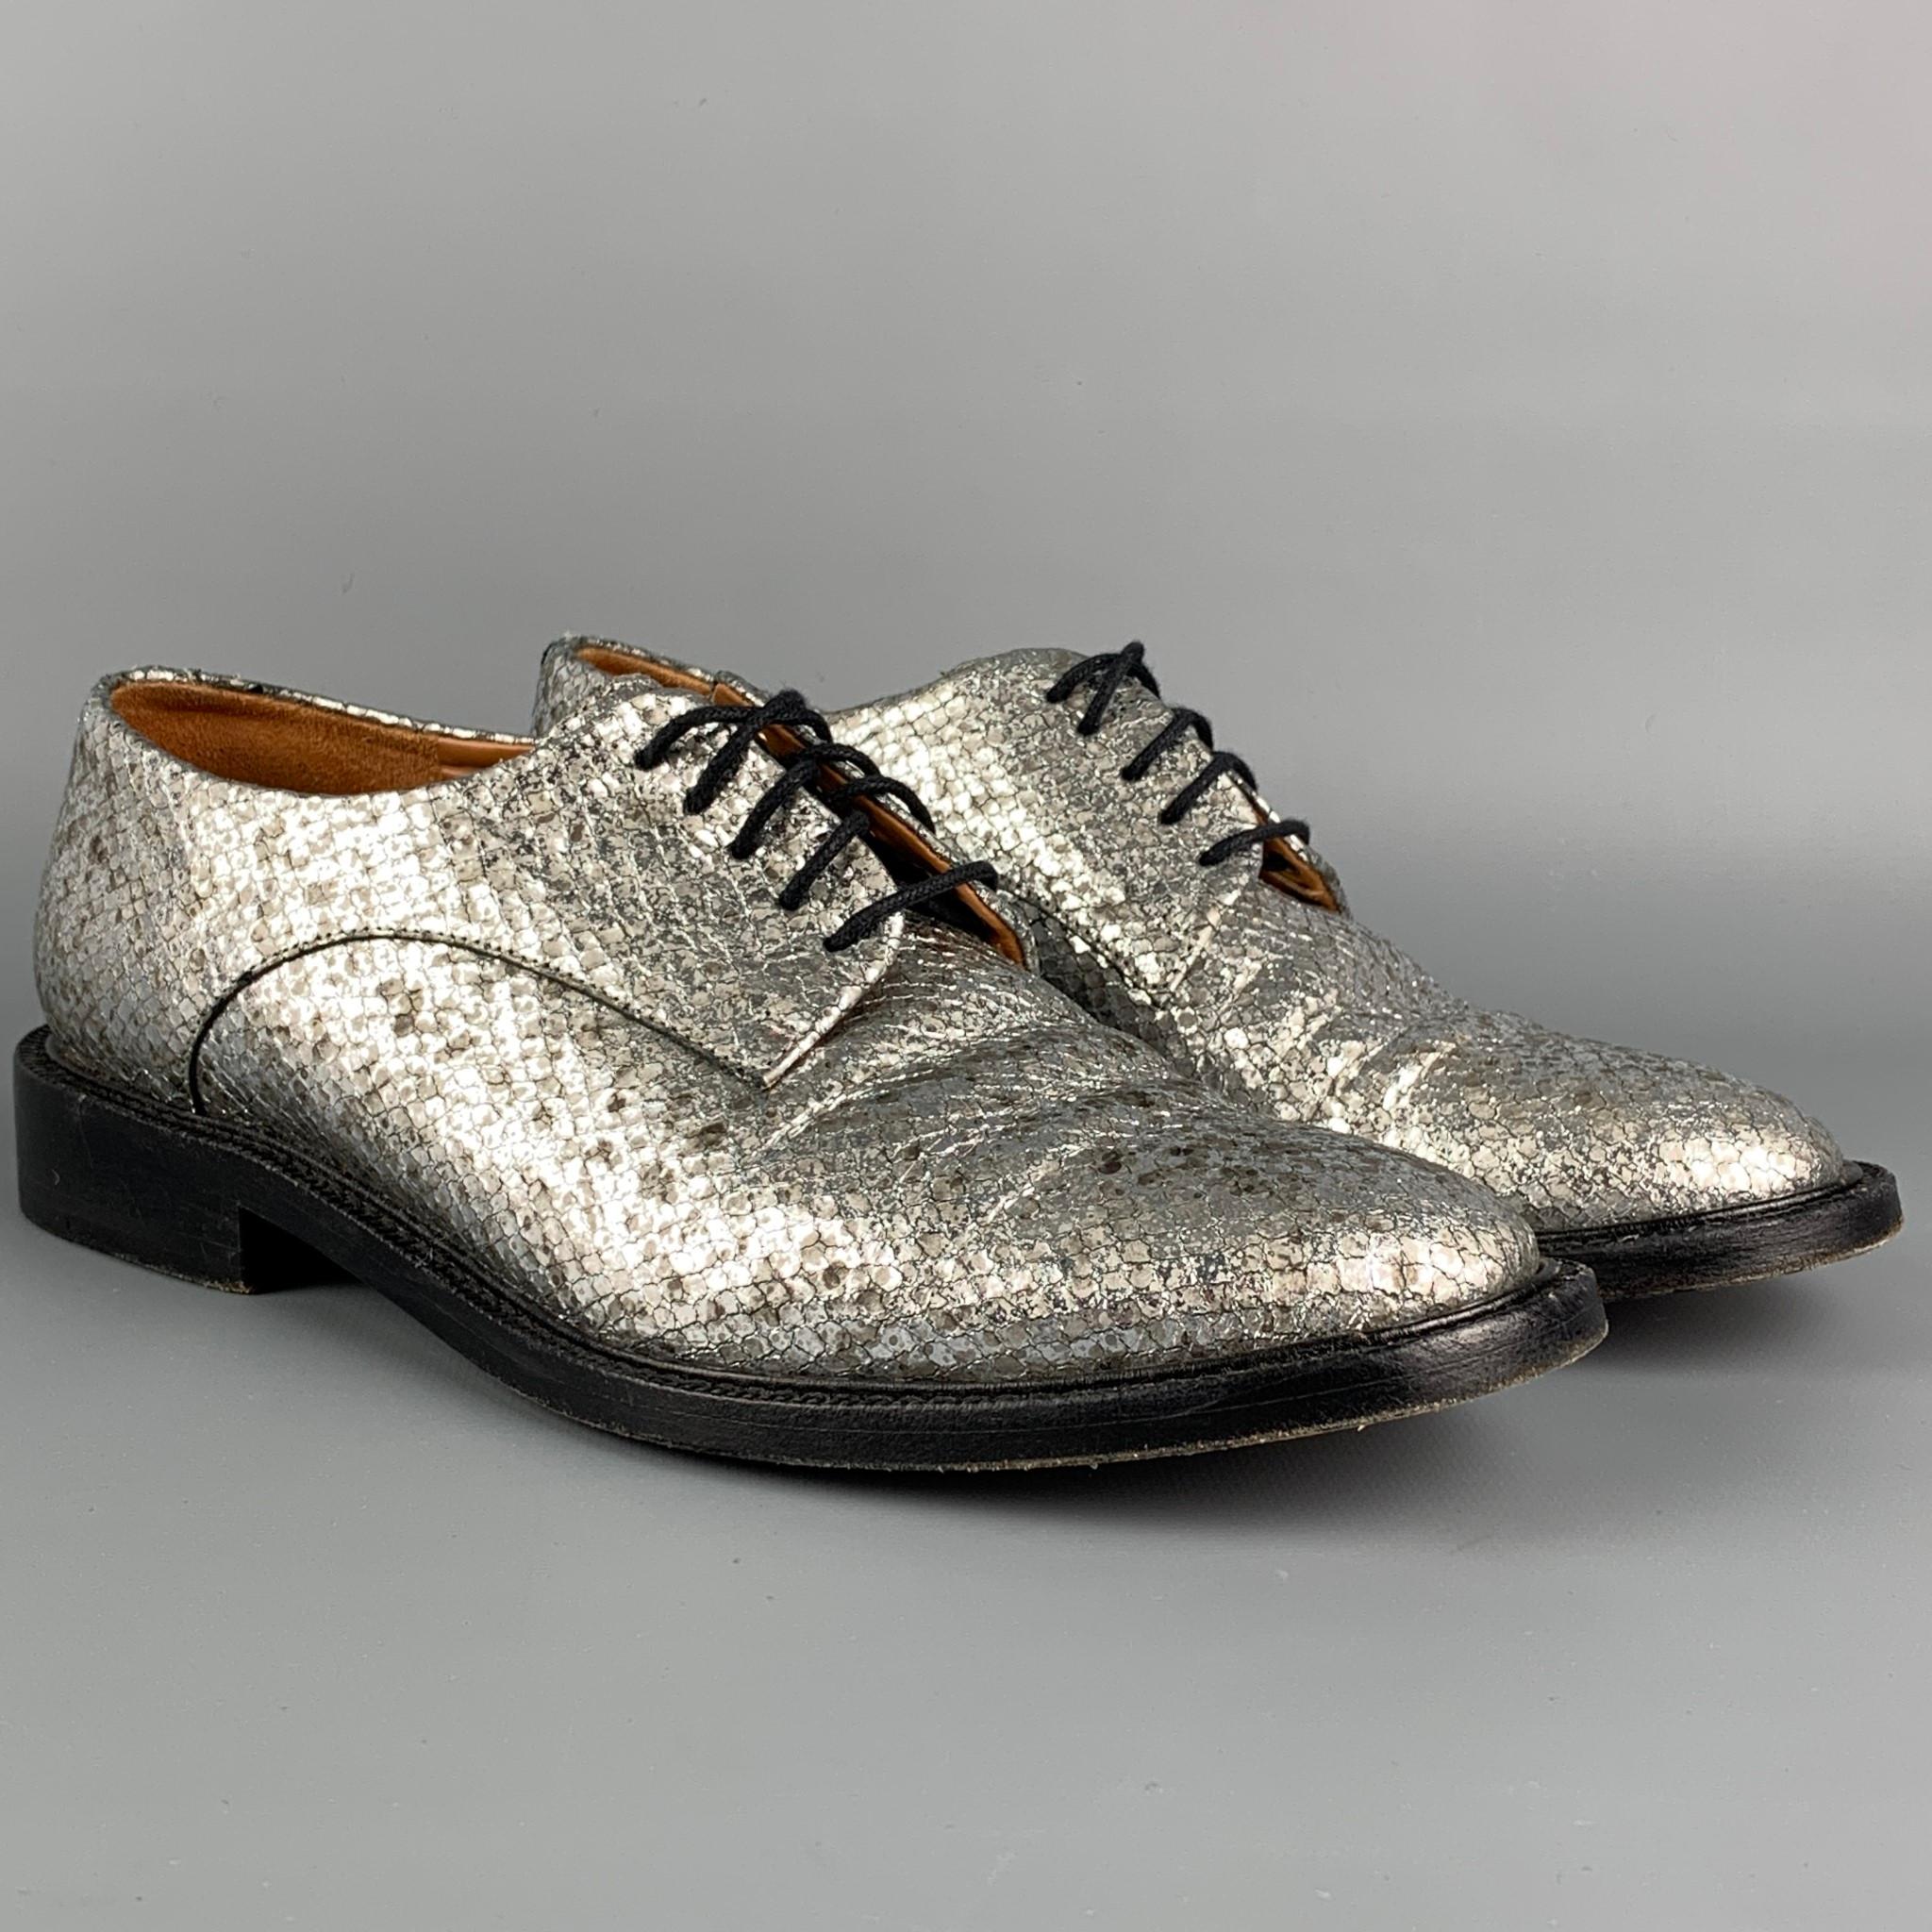 ROBERT CLERGERIE shoes comes in a silver metallic textured leather featuring a lace up closure. Made in France. 

Very Good Pre-Owned Condition.
Marked: 38.5 4580

Outsole: 10.5 in. x 4 in. 